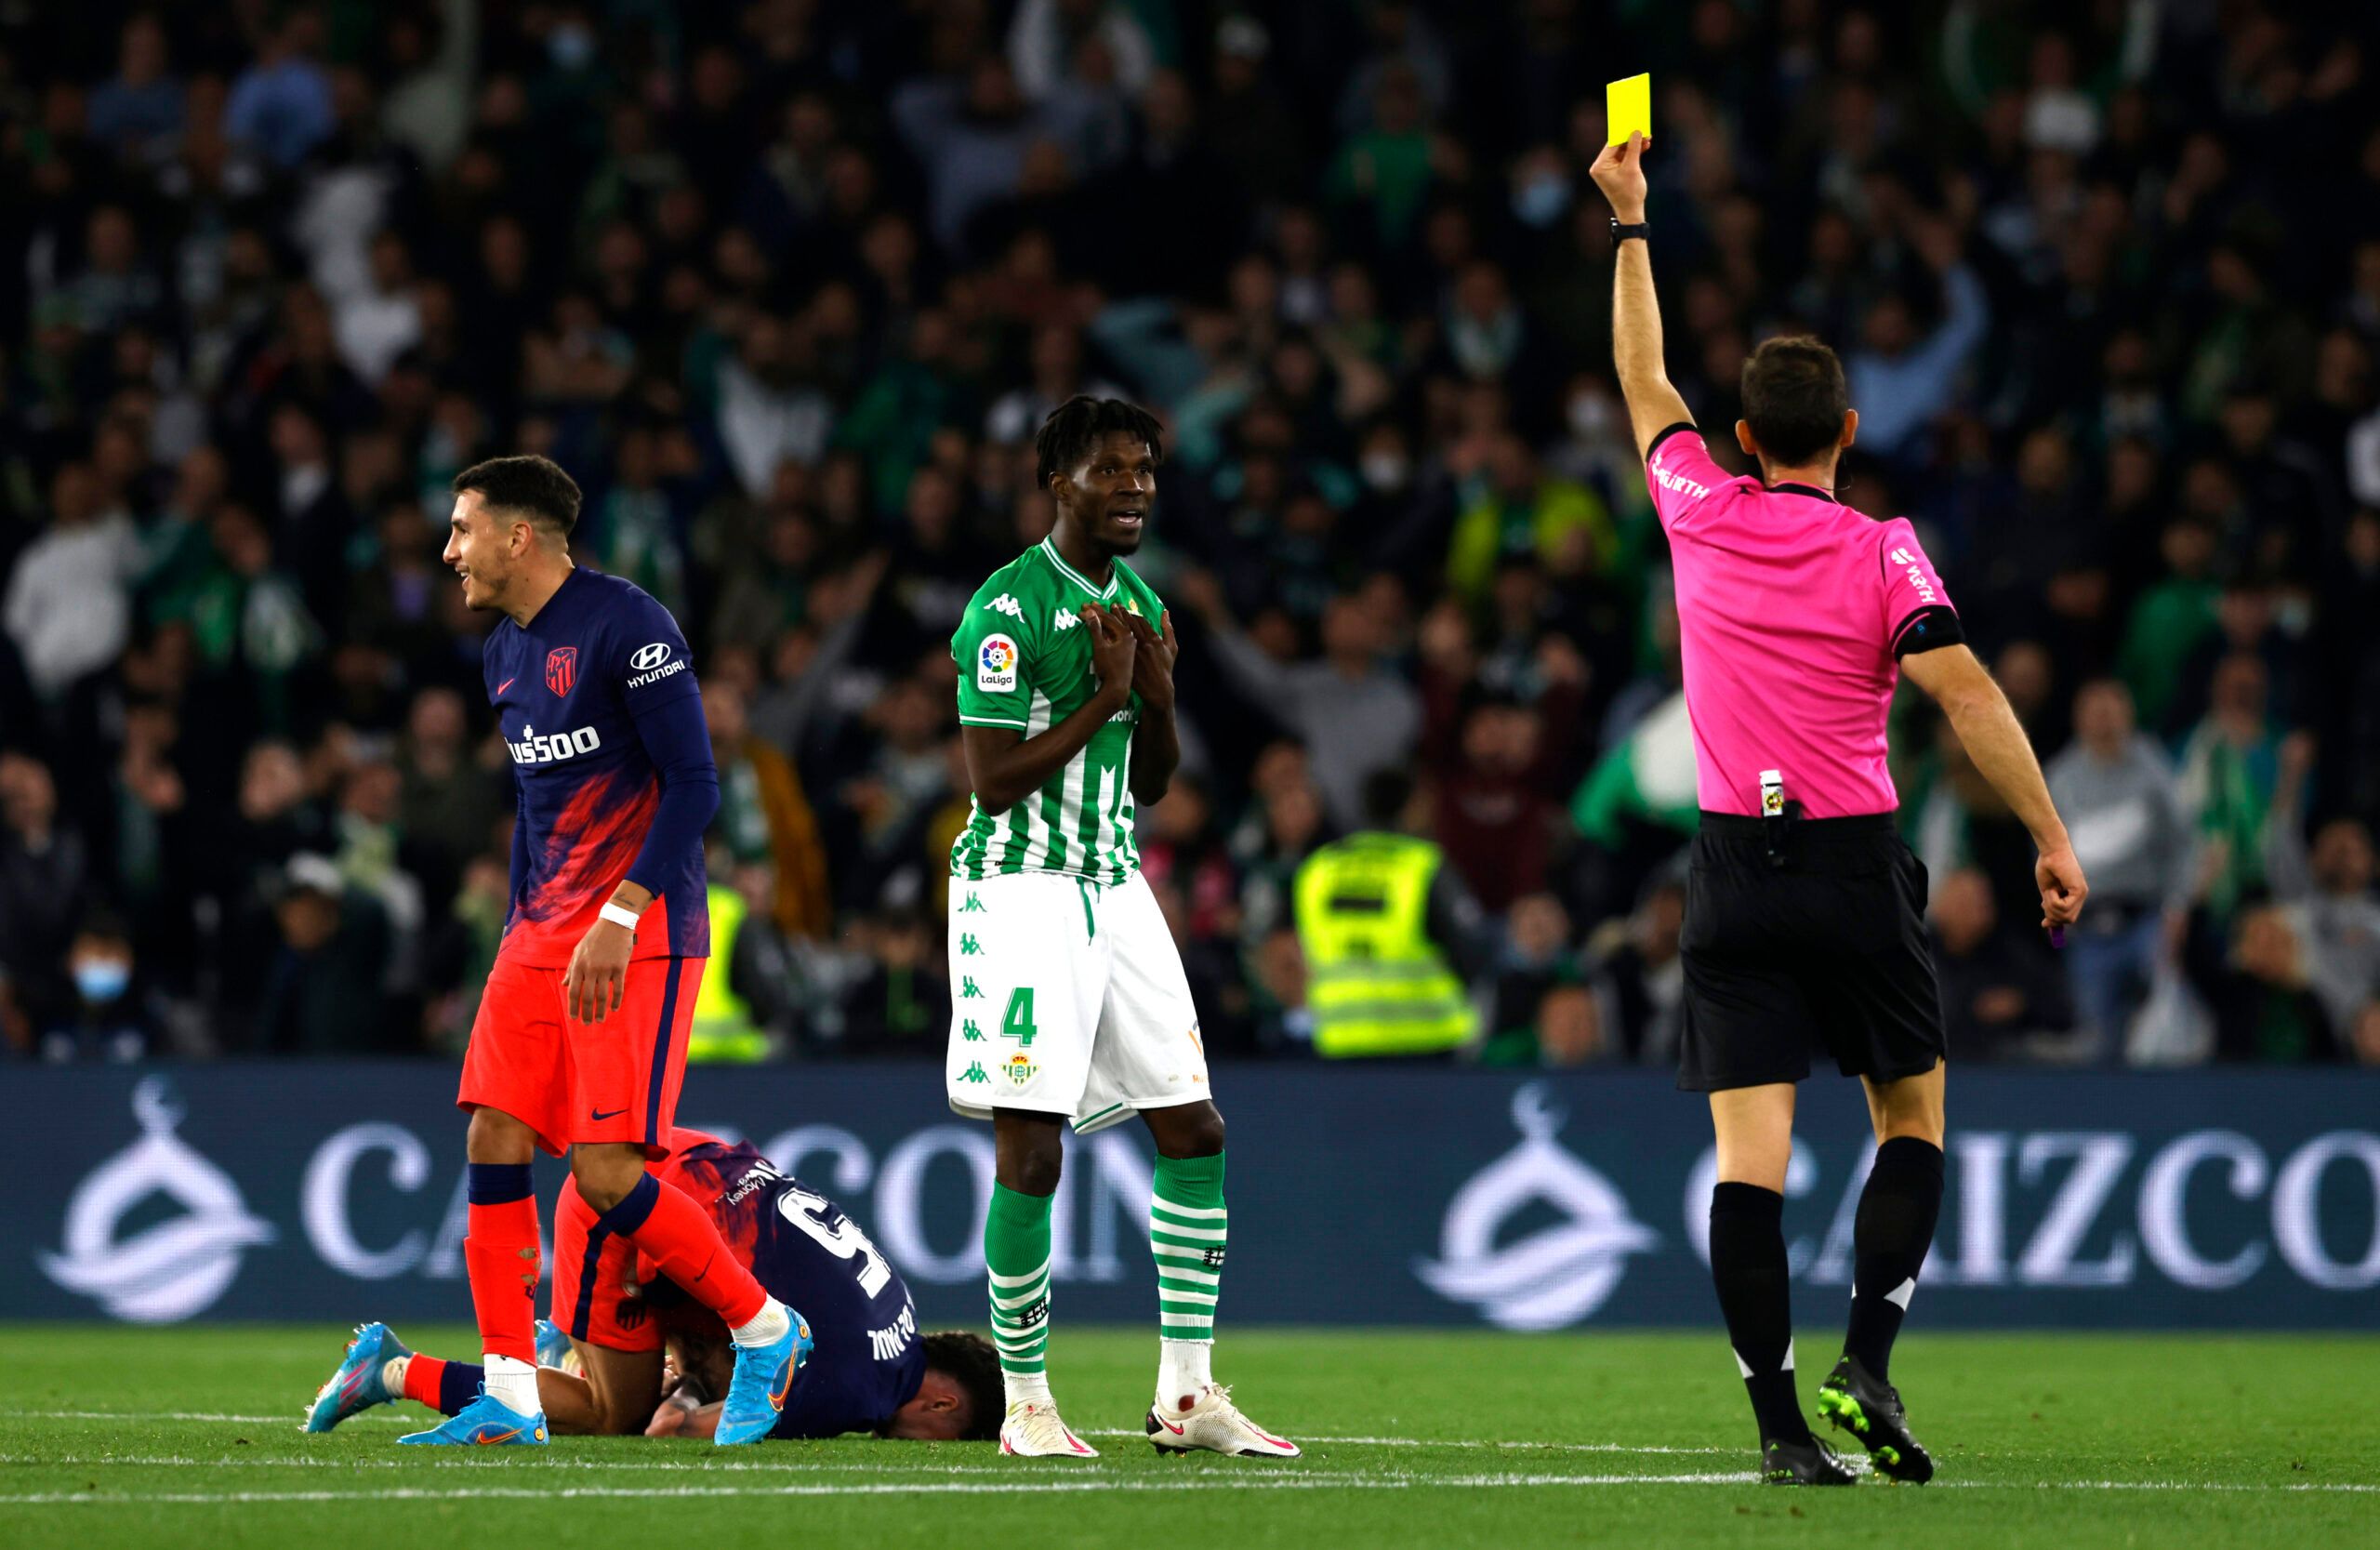 Soccer Football - LaLiga - Real Betis v Atletico Madrid - Estadio Benito Villamarin, Seville, Spain - March 6, 2022 Real Betis' Paul Akouokou is shown a yellow card by referee Guillermo Cuadra REUTERS/Marcelo Del Pozo